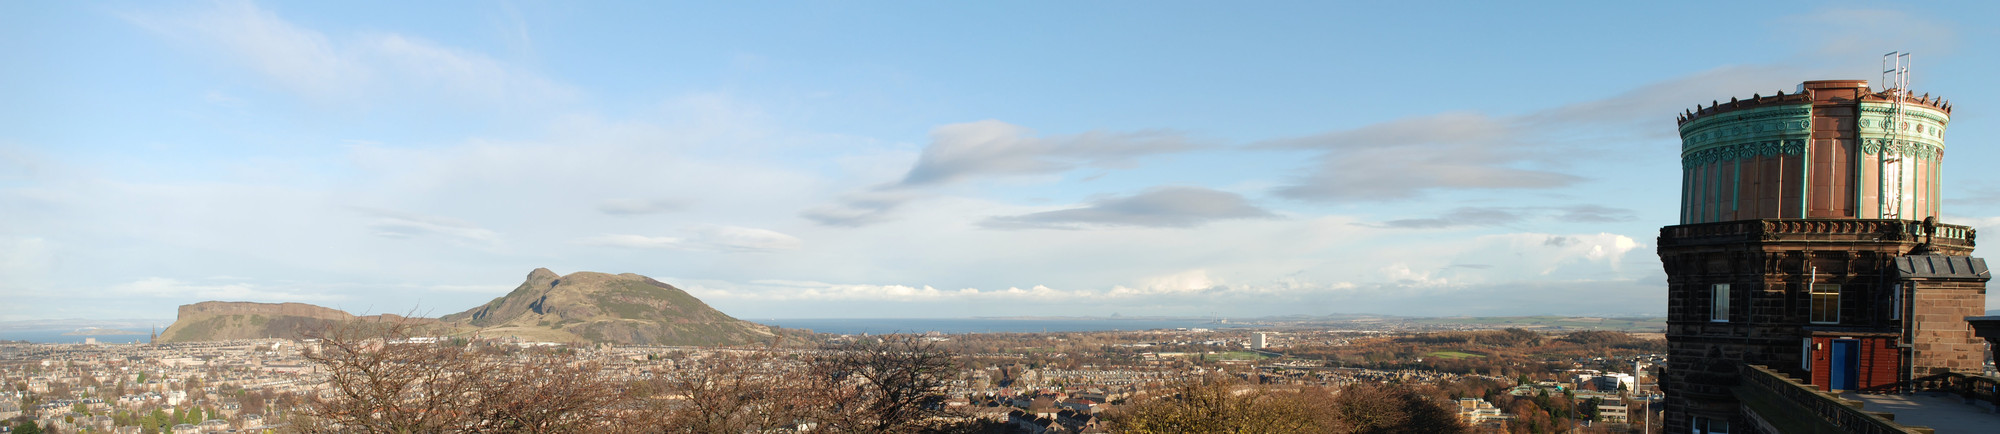 Panoramic view of Edinburgh looking towards Arthur's Seat, taken from the Royal Observatory roof.